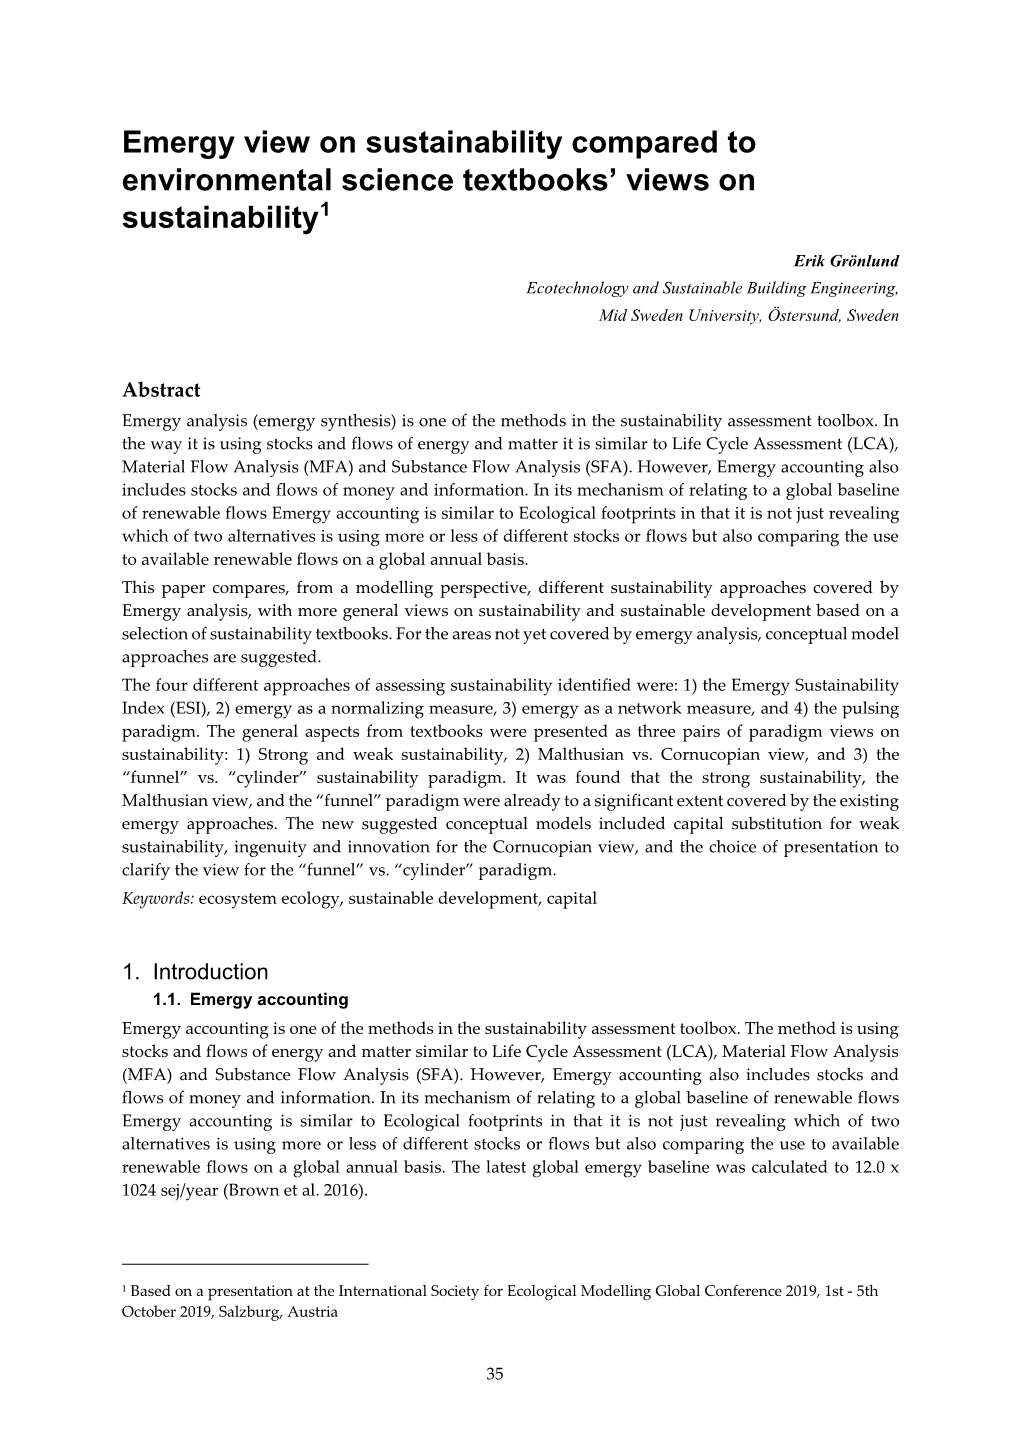 Emergy View on Sustainability Compared to Environmental Science